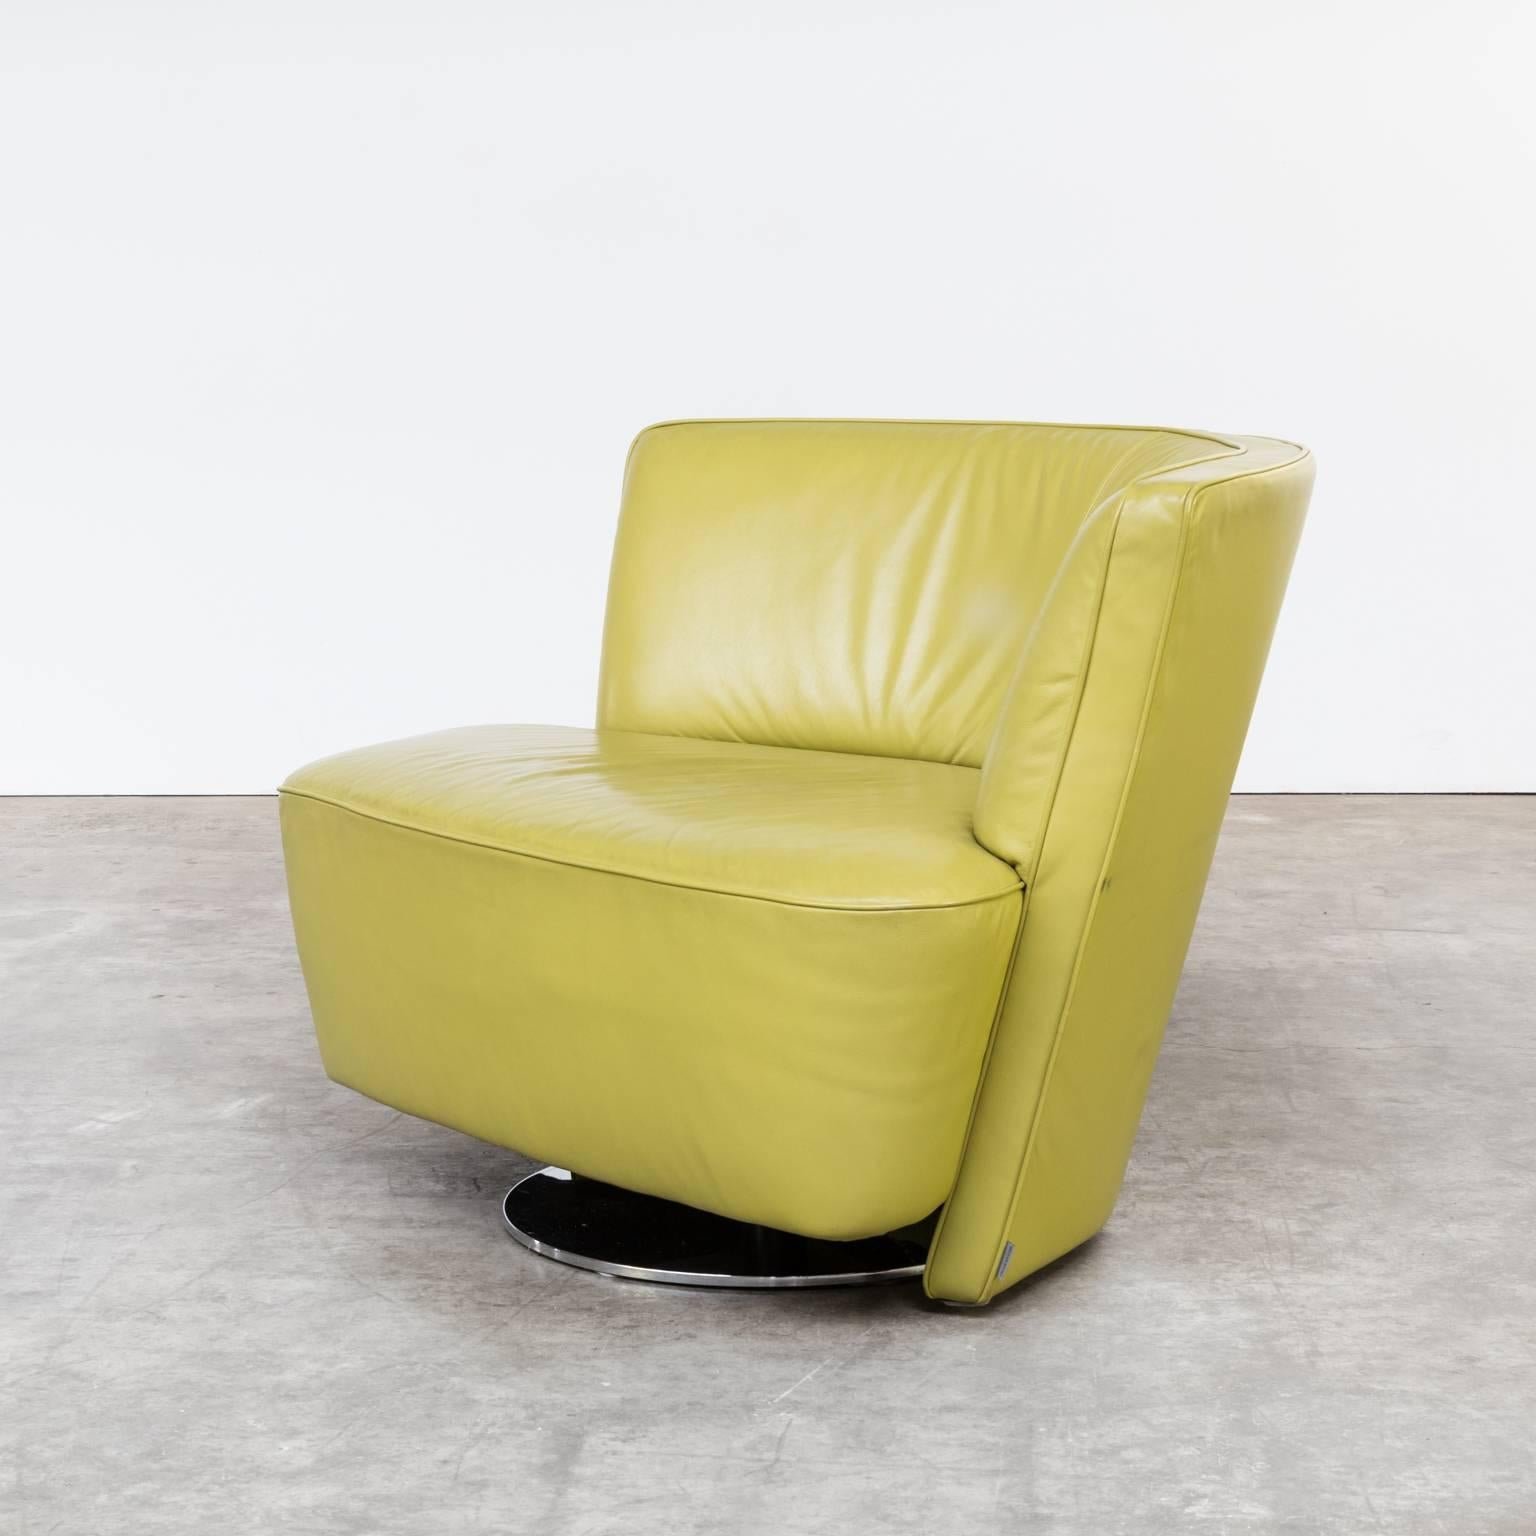 1990s EOOS ‘Drift’ swivel fauteuil for Walter Knoll. The Drift chair is developed by a team of three Australian designers from their studio EOOS, specially for Walter Knoll. The drift is able to turns towards the user, friendly and inviting. The